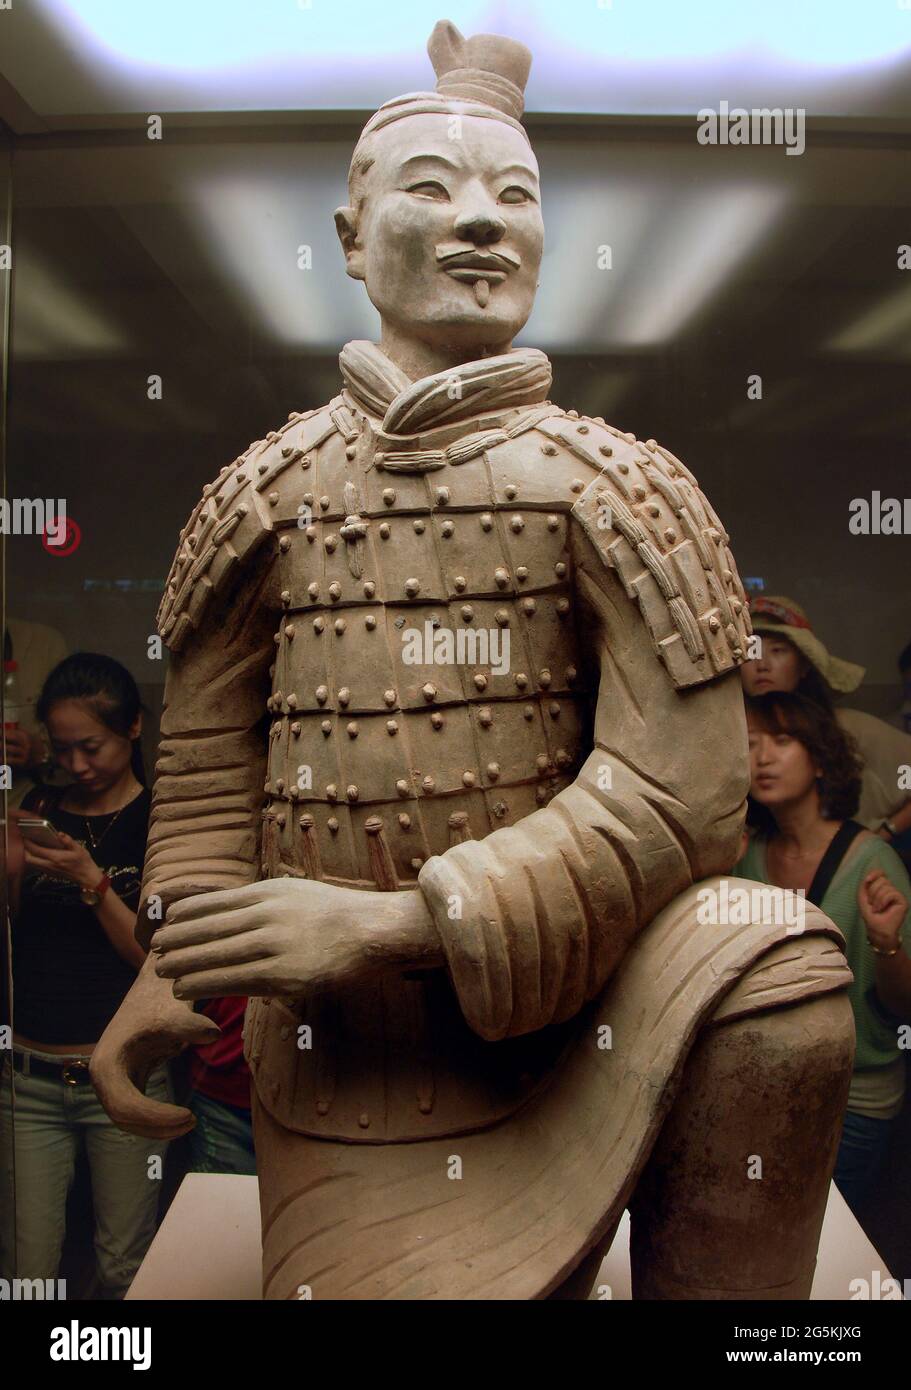 Terracotta Warriors, Xian, Shaanxi Province, China. Detail of a kneeling archer in the Terracotta Army museum. Stock Photo